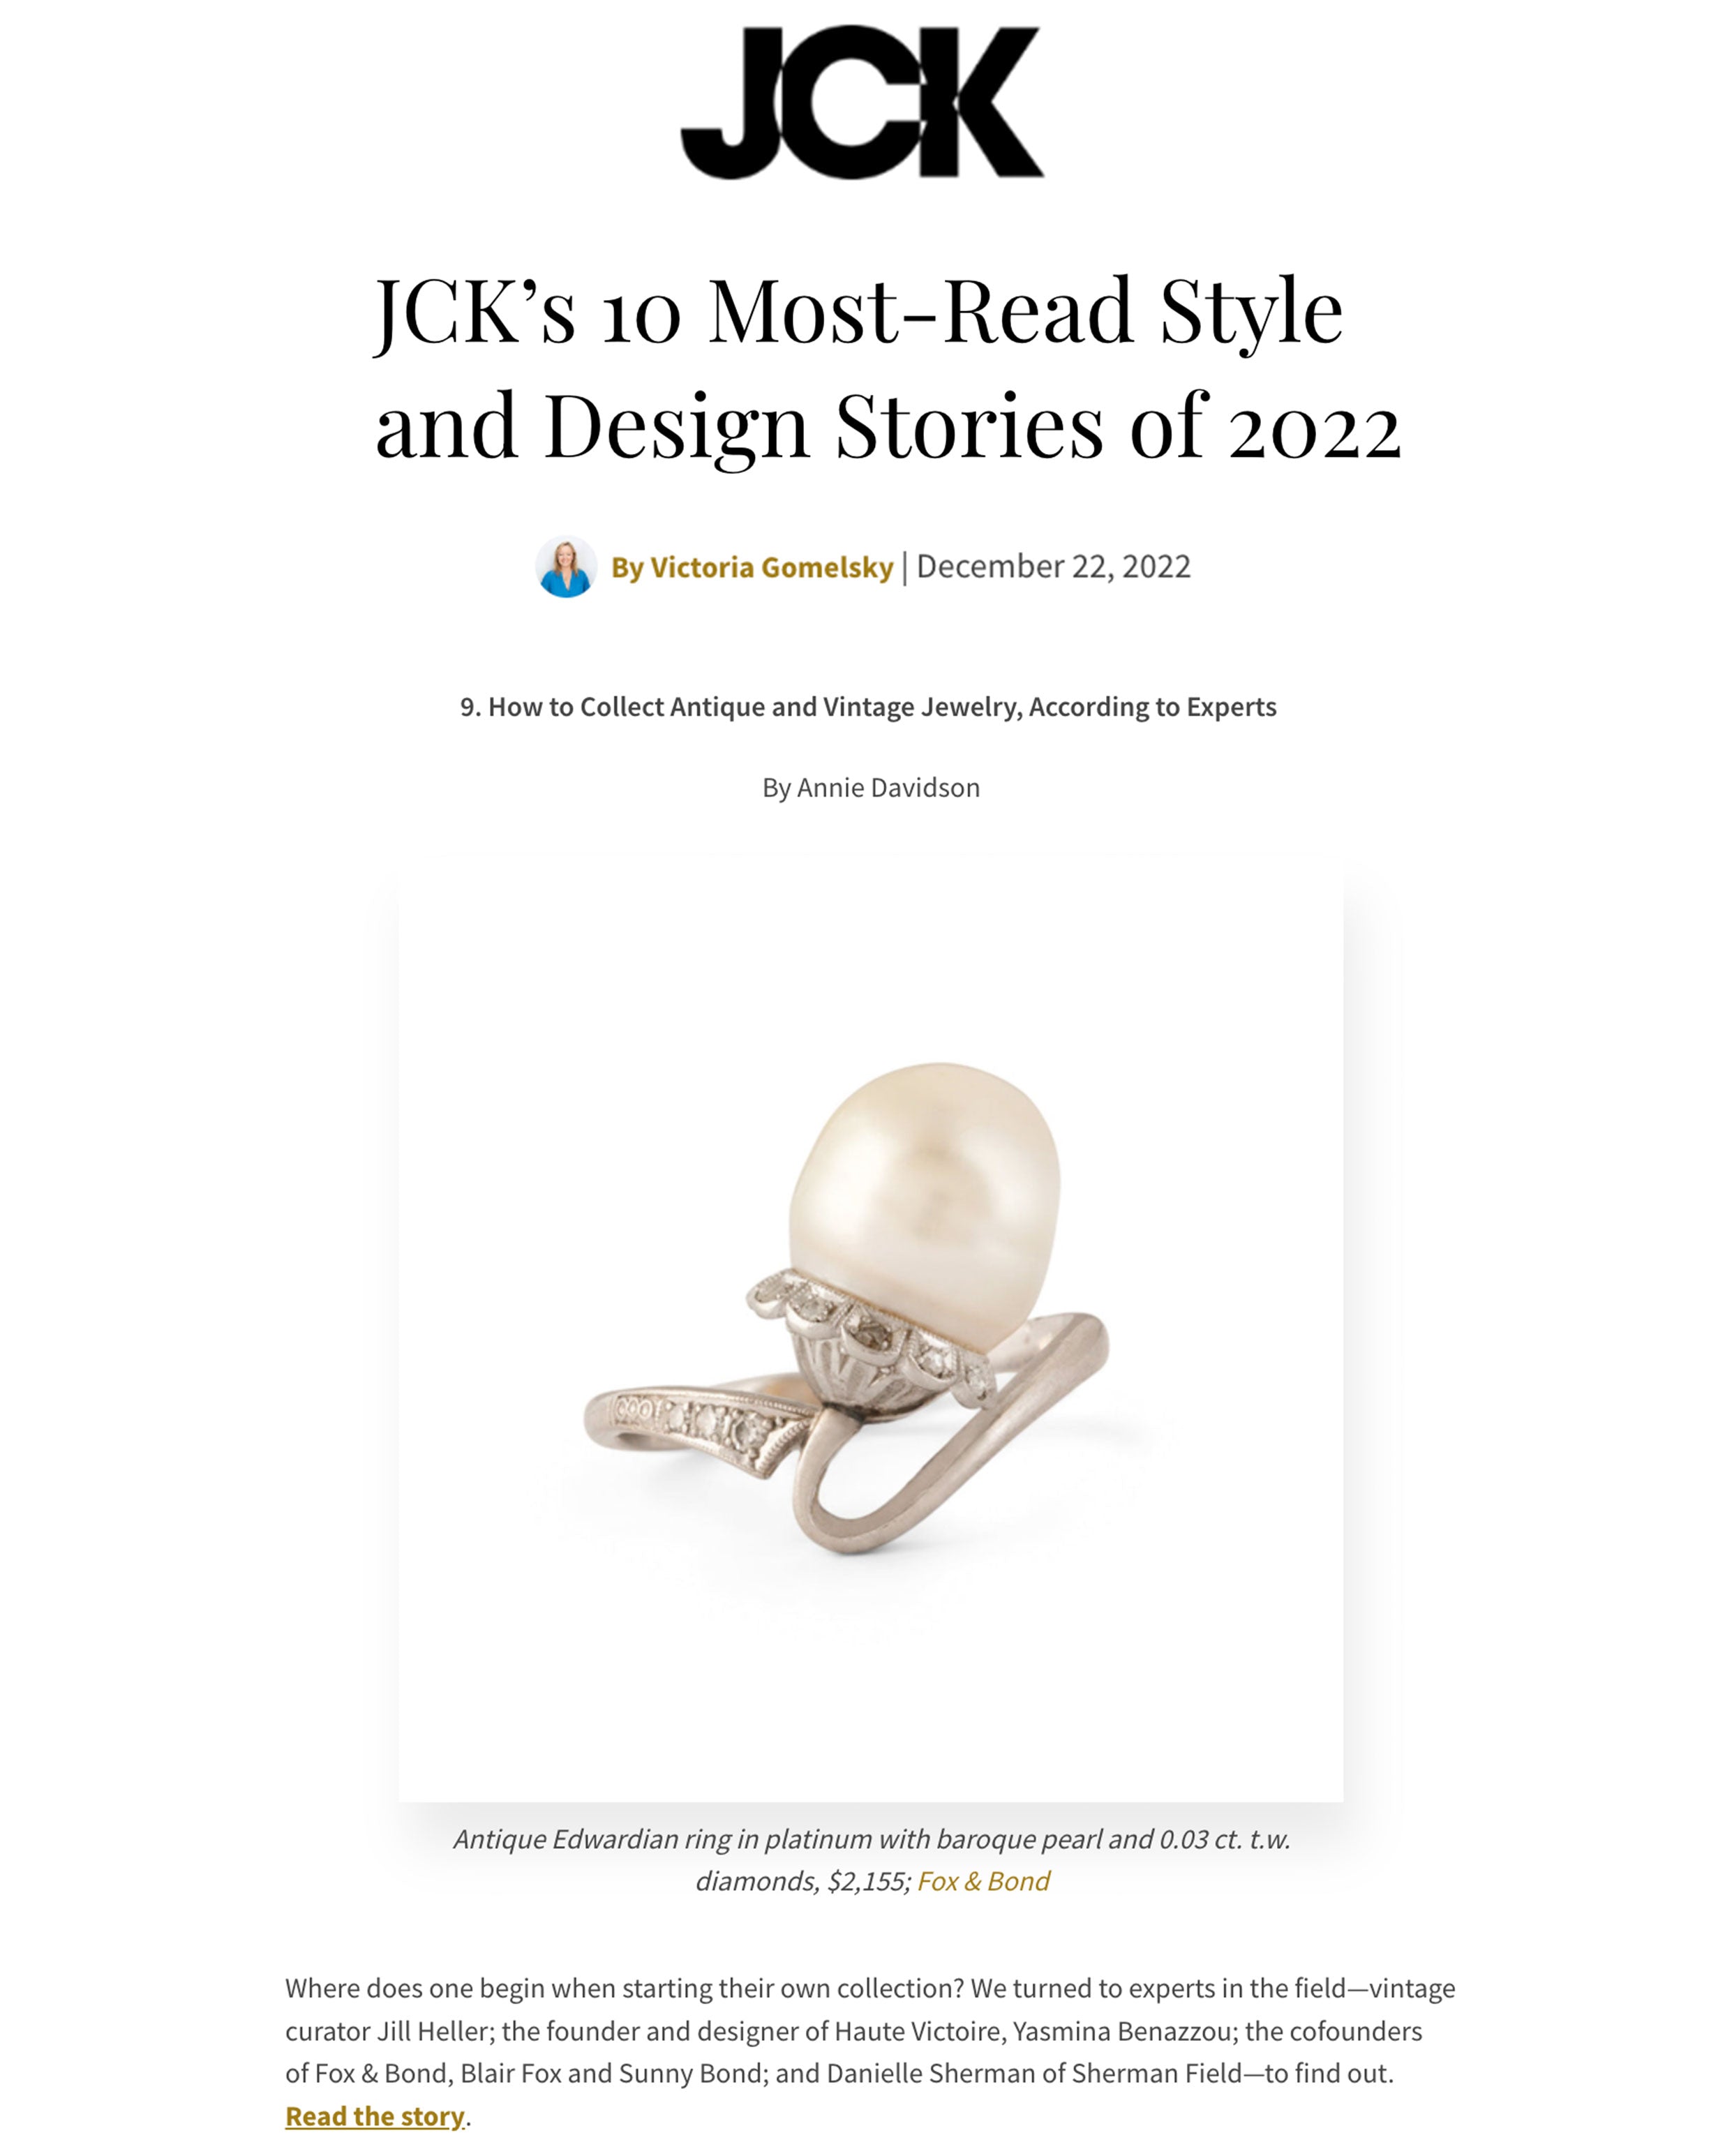 JCK’s 10 Most-Read Style and Design Stories of 2022